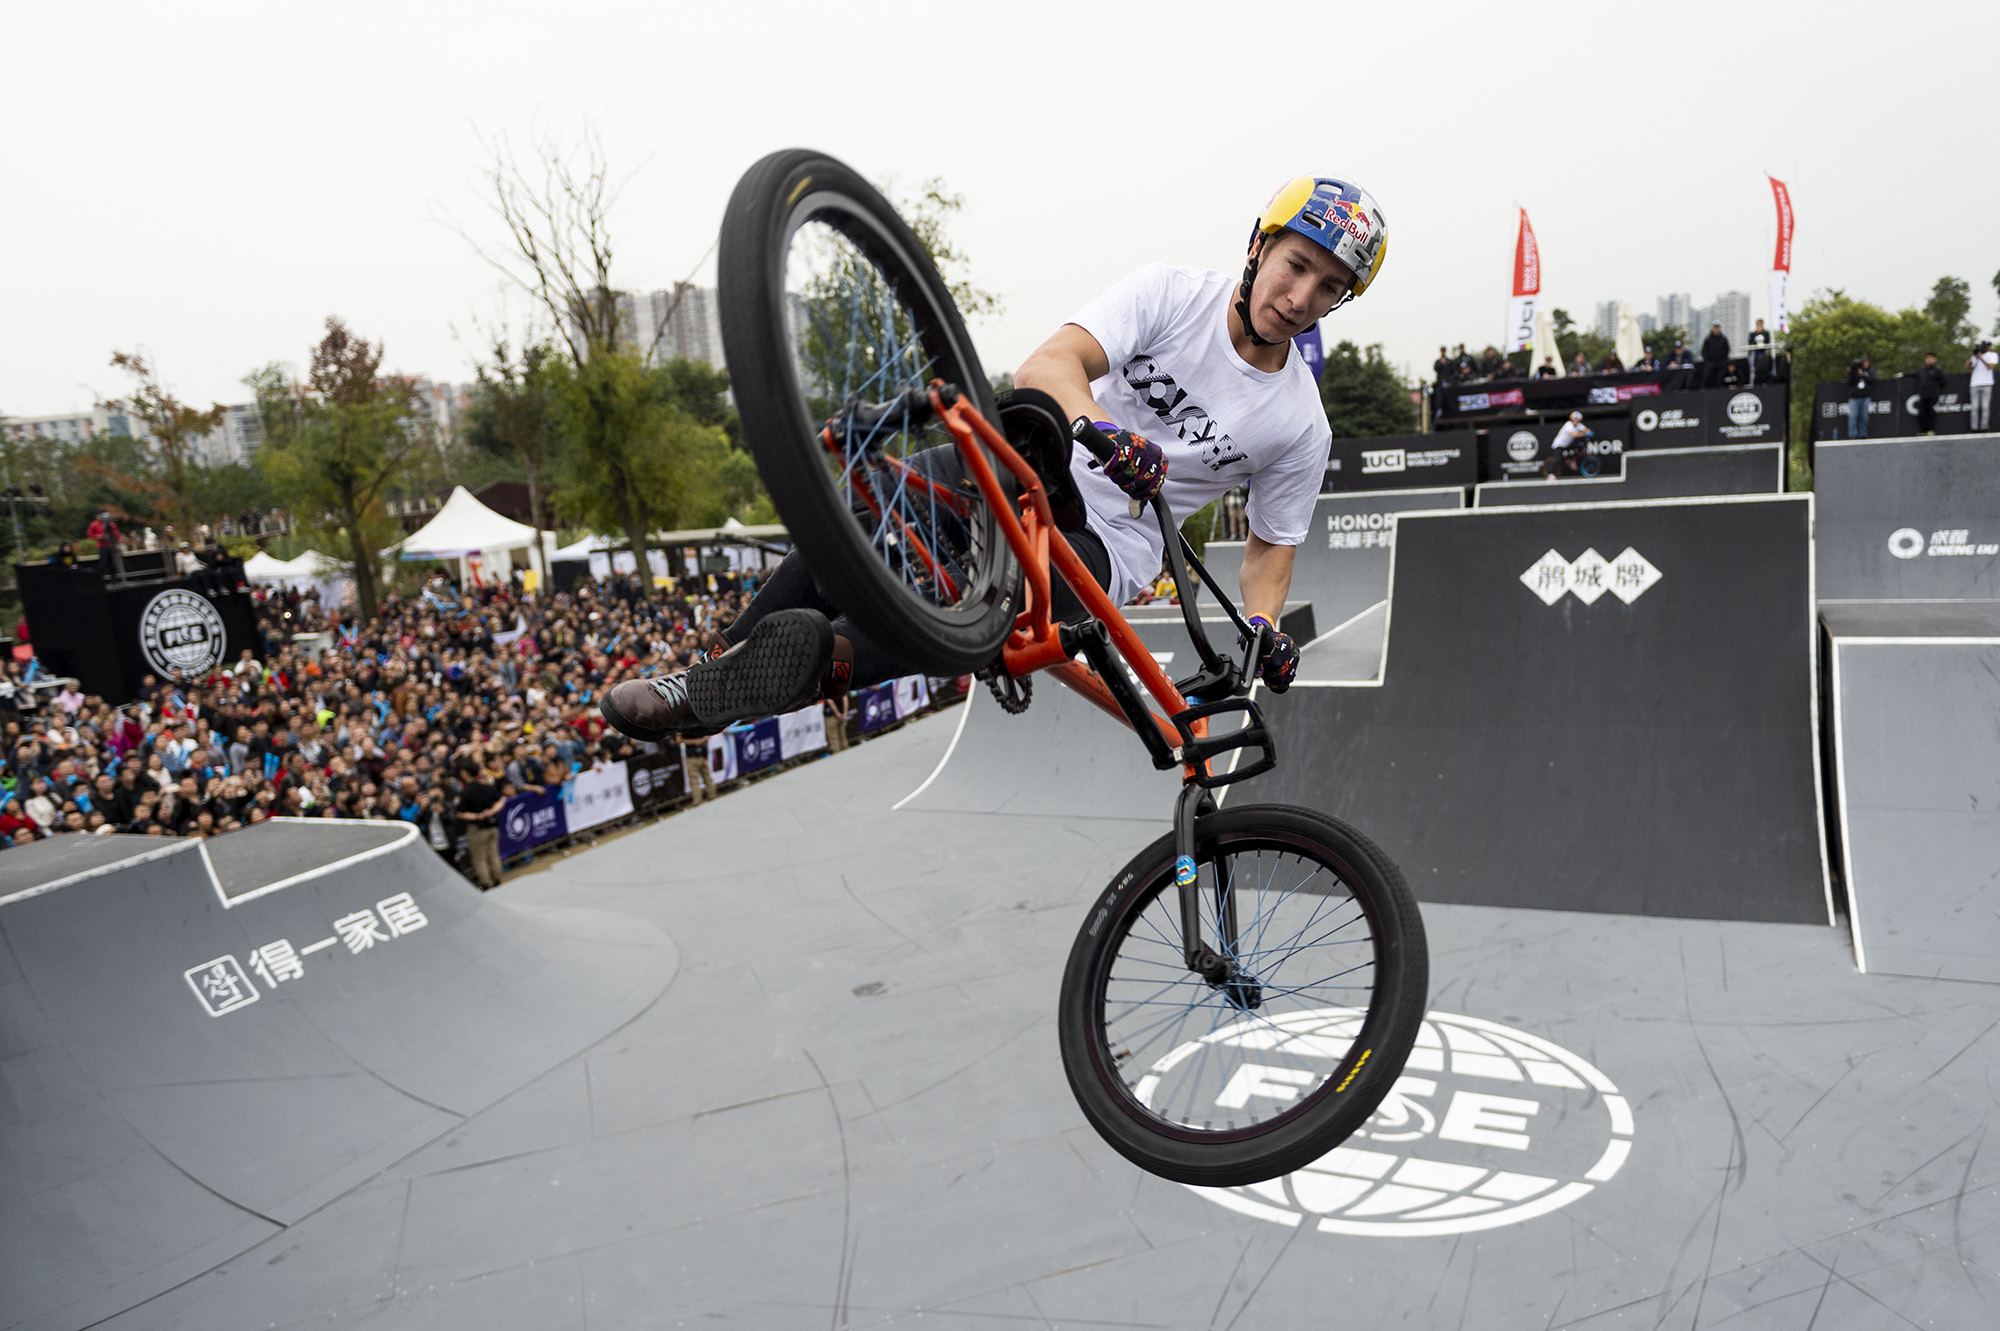 REPLAY UCI BMX FREESTYLE PARK WORLD CUP FINAL MEN Newsroom Fise